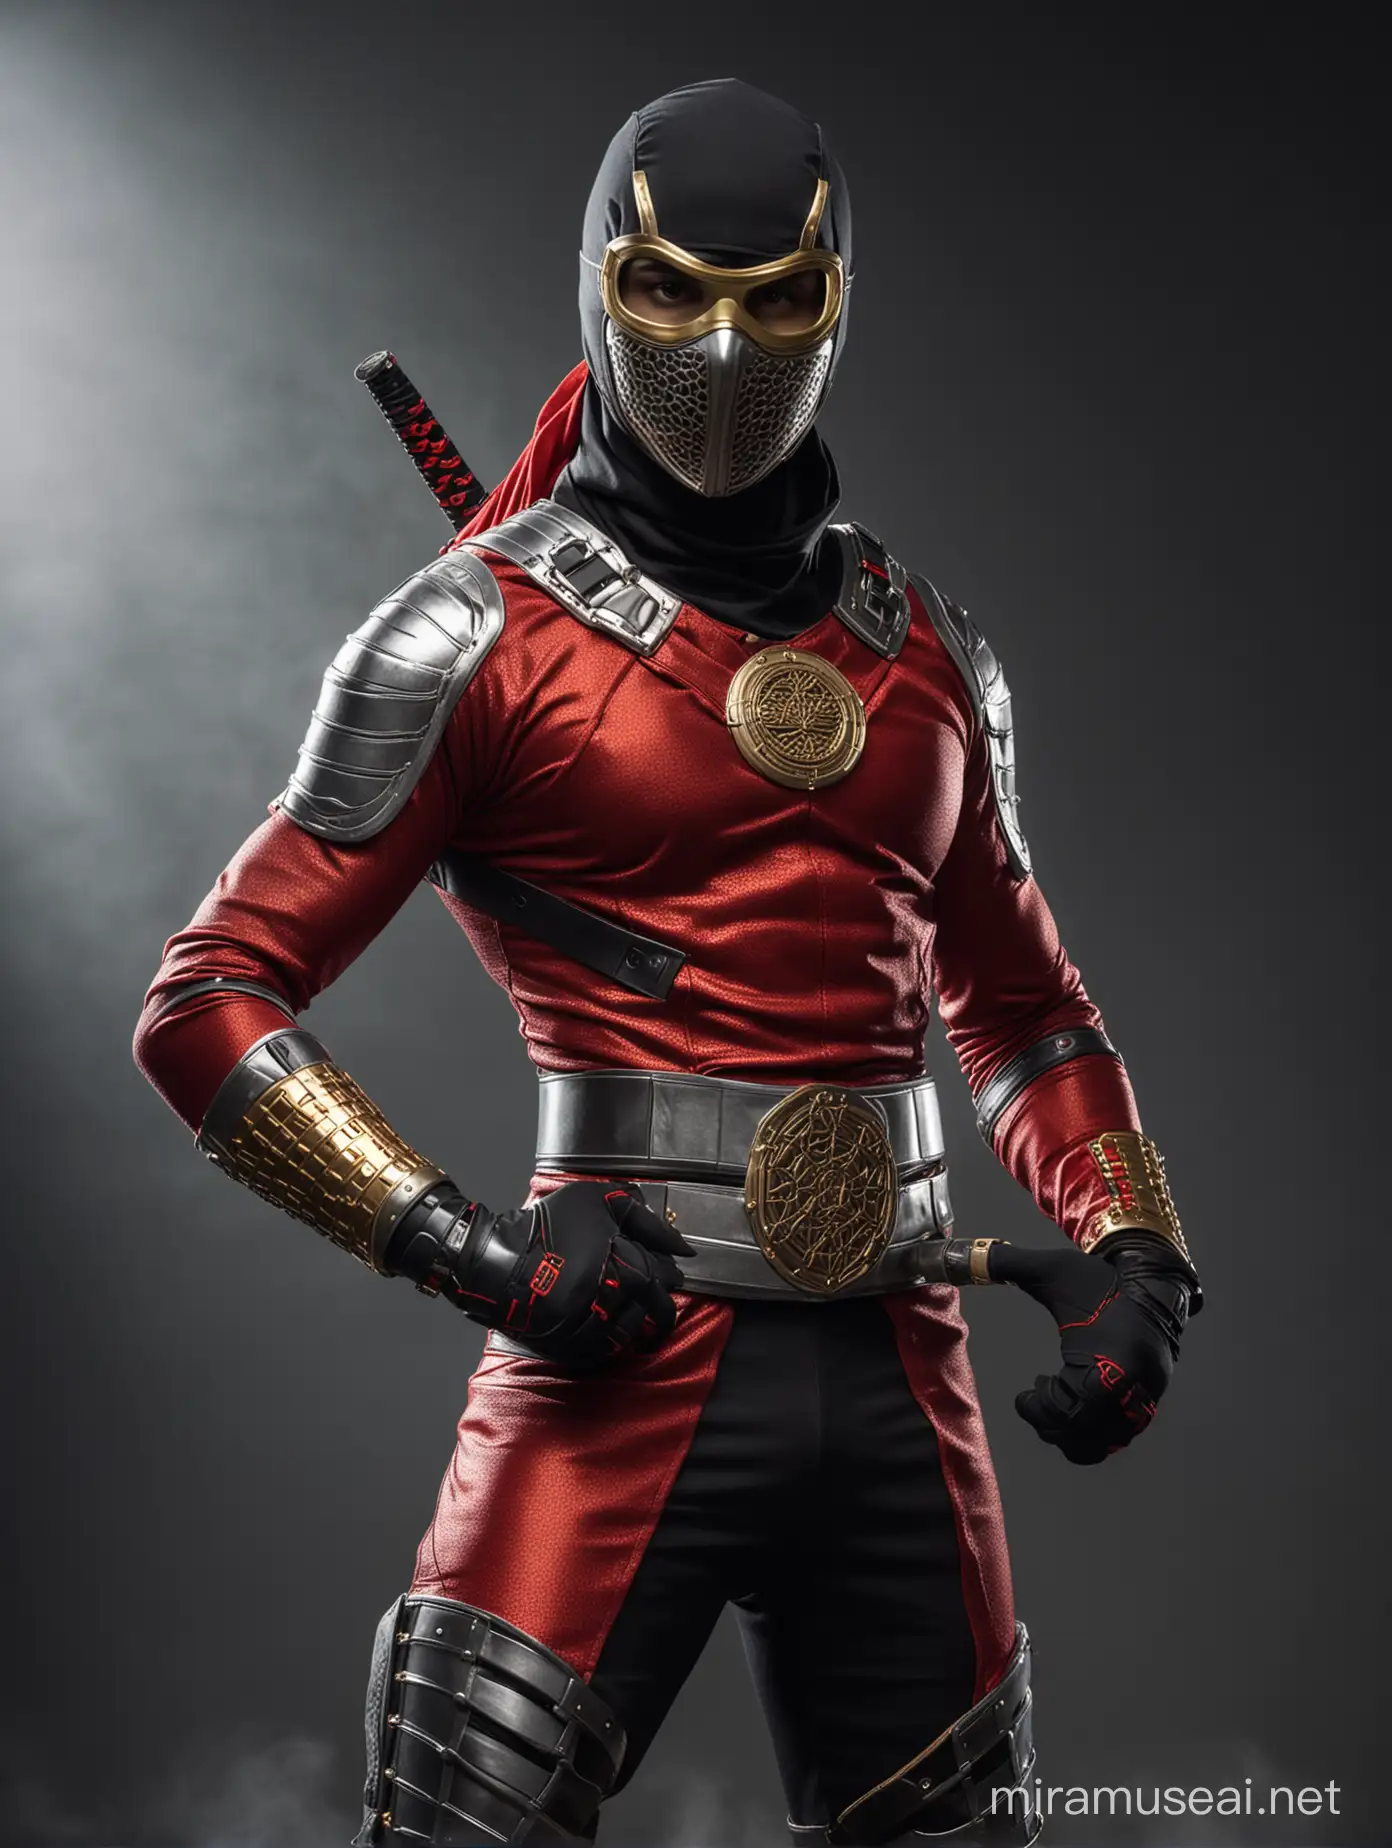 urban ninja, sleek, red and silver colour scheme, head to toe, gold accents, gold illuminated medallion on chest, silver mesh on arms, mask, cinematic promo shot, full body